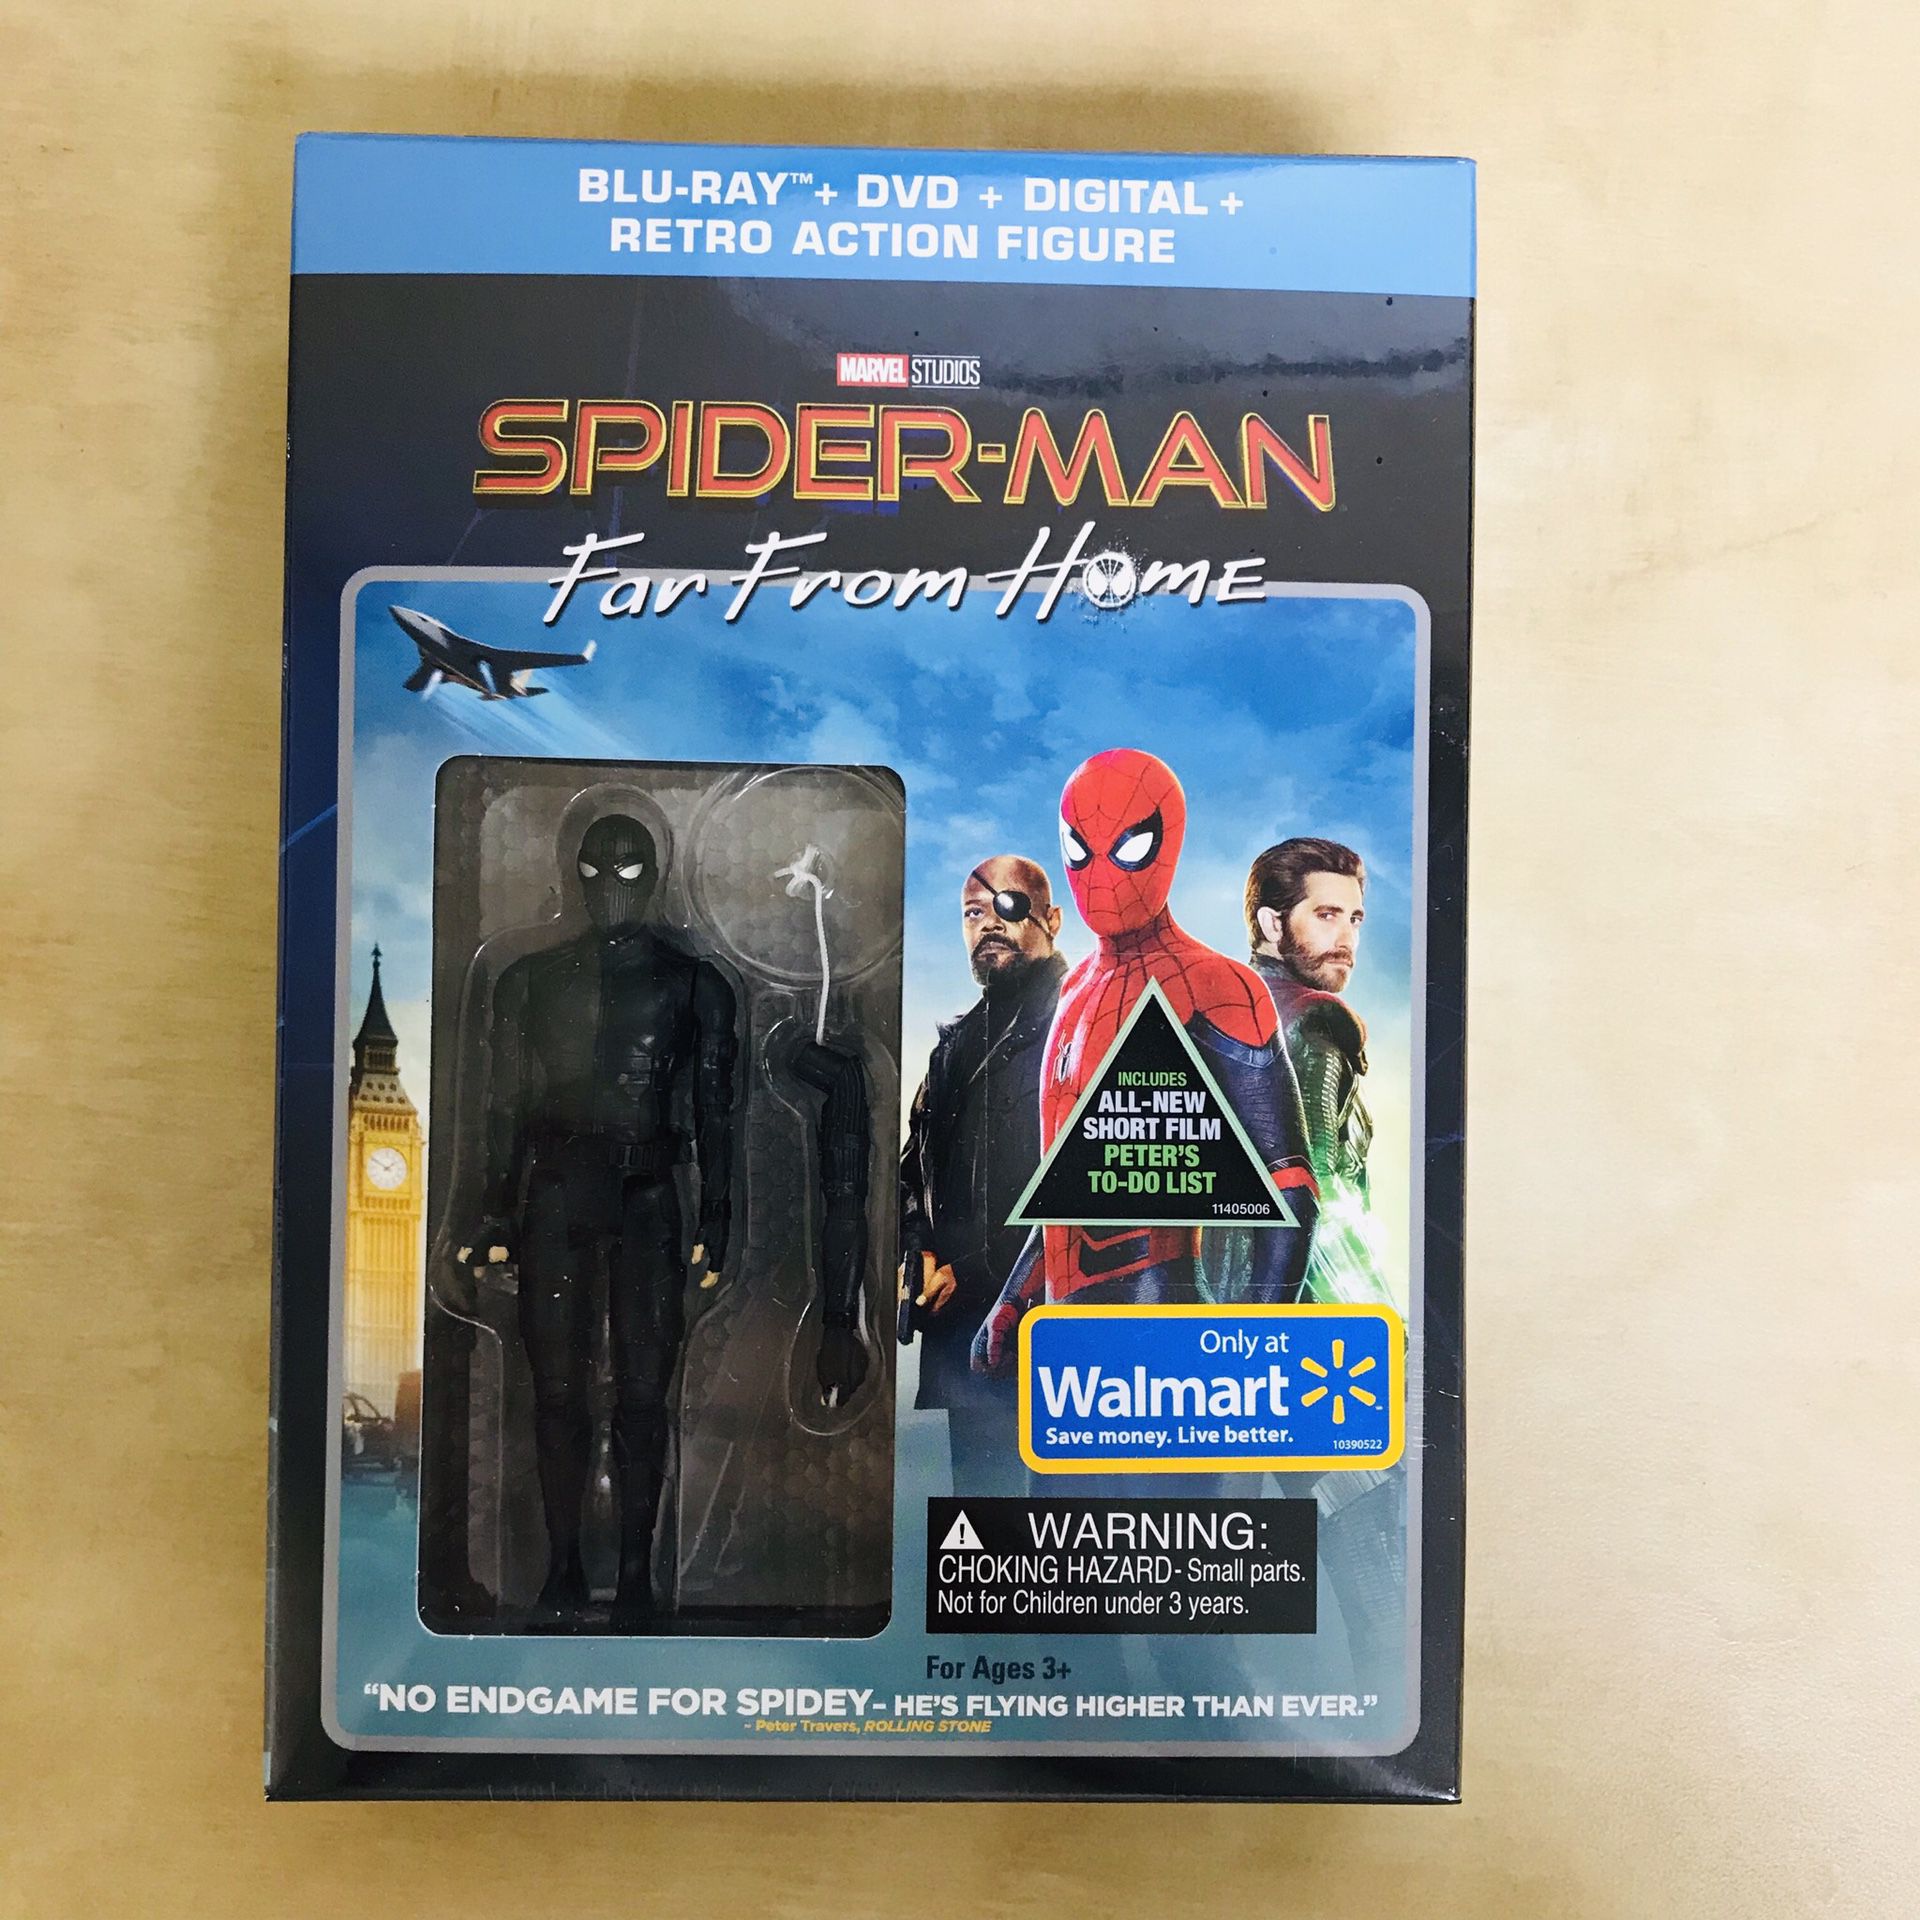 Spider-Man far from home blu ray set